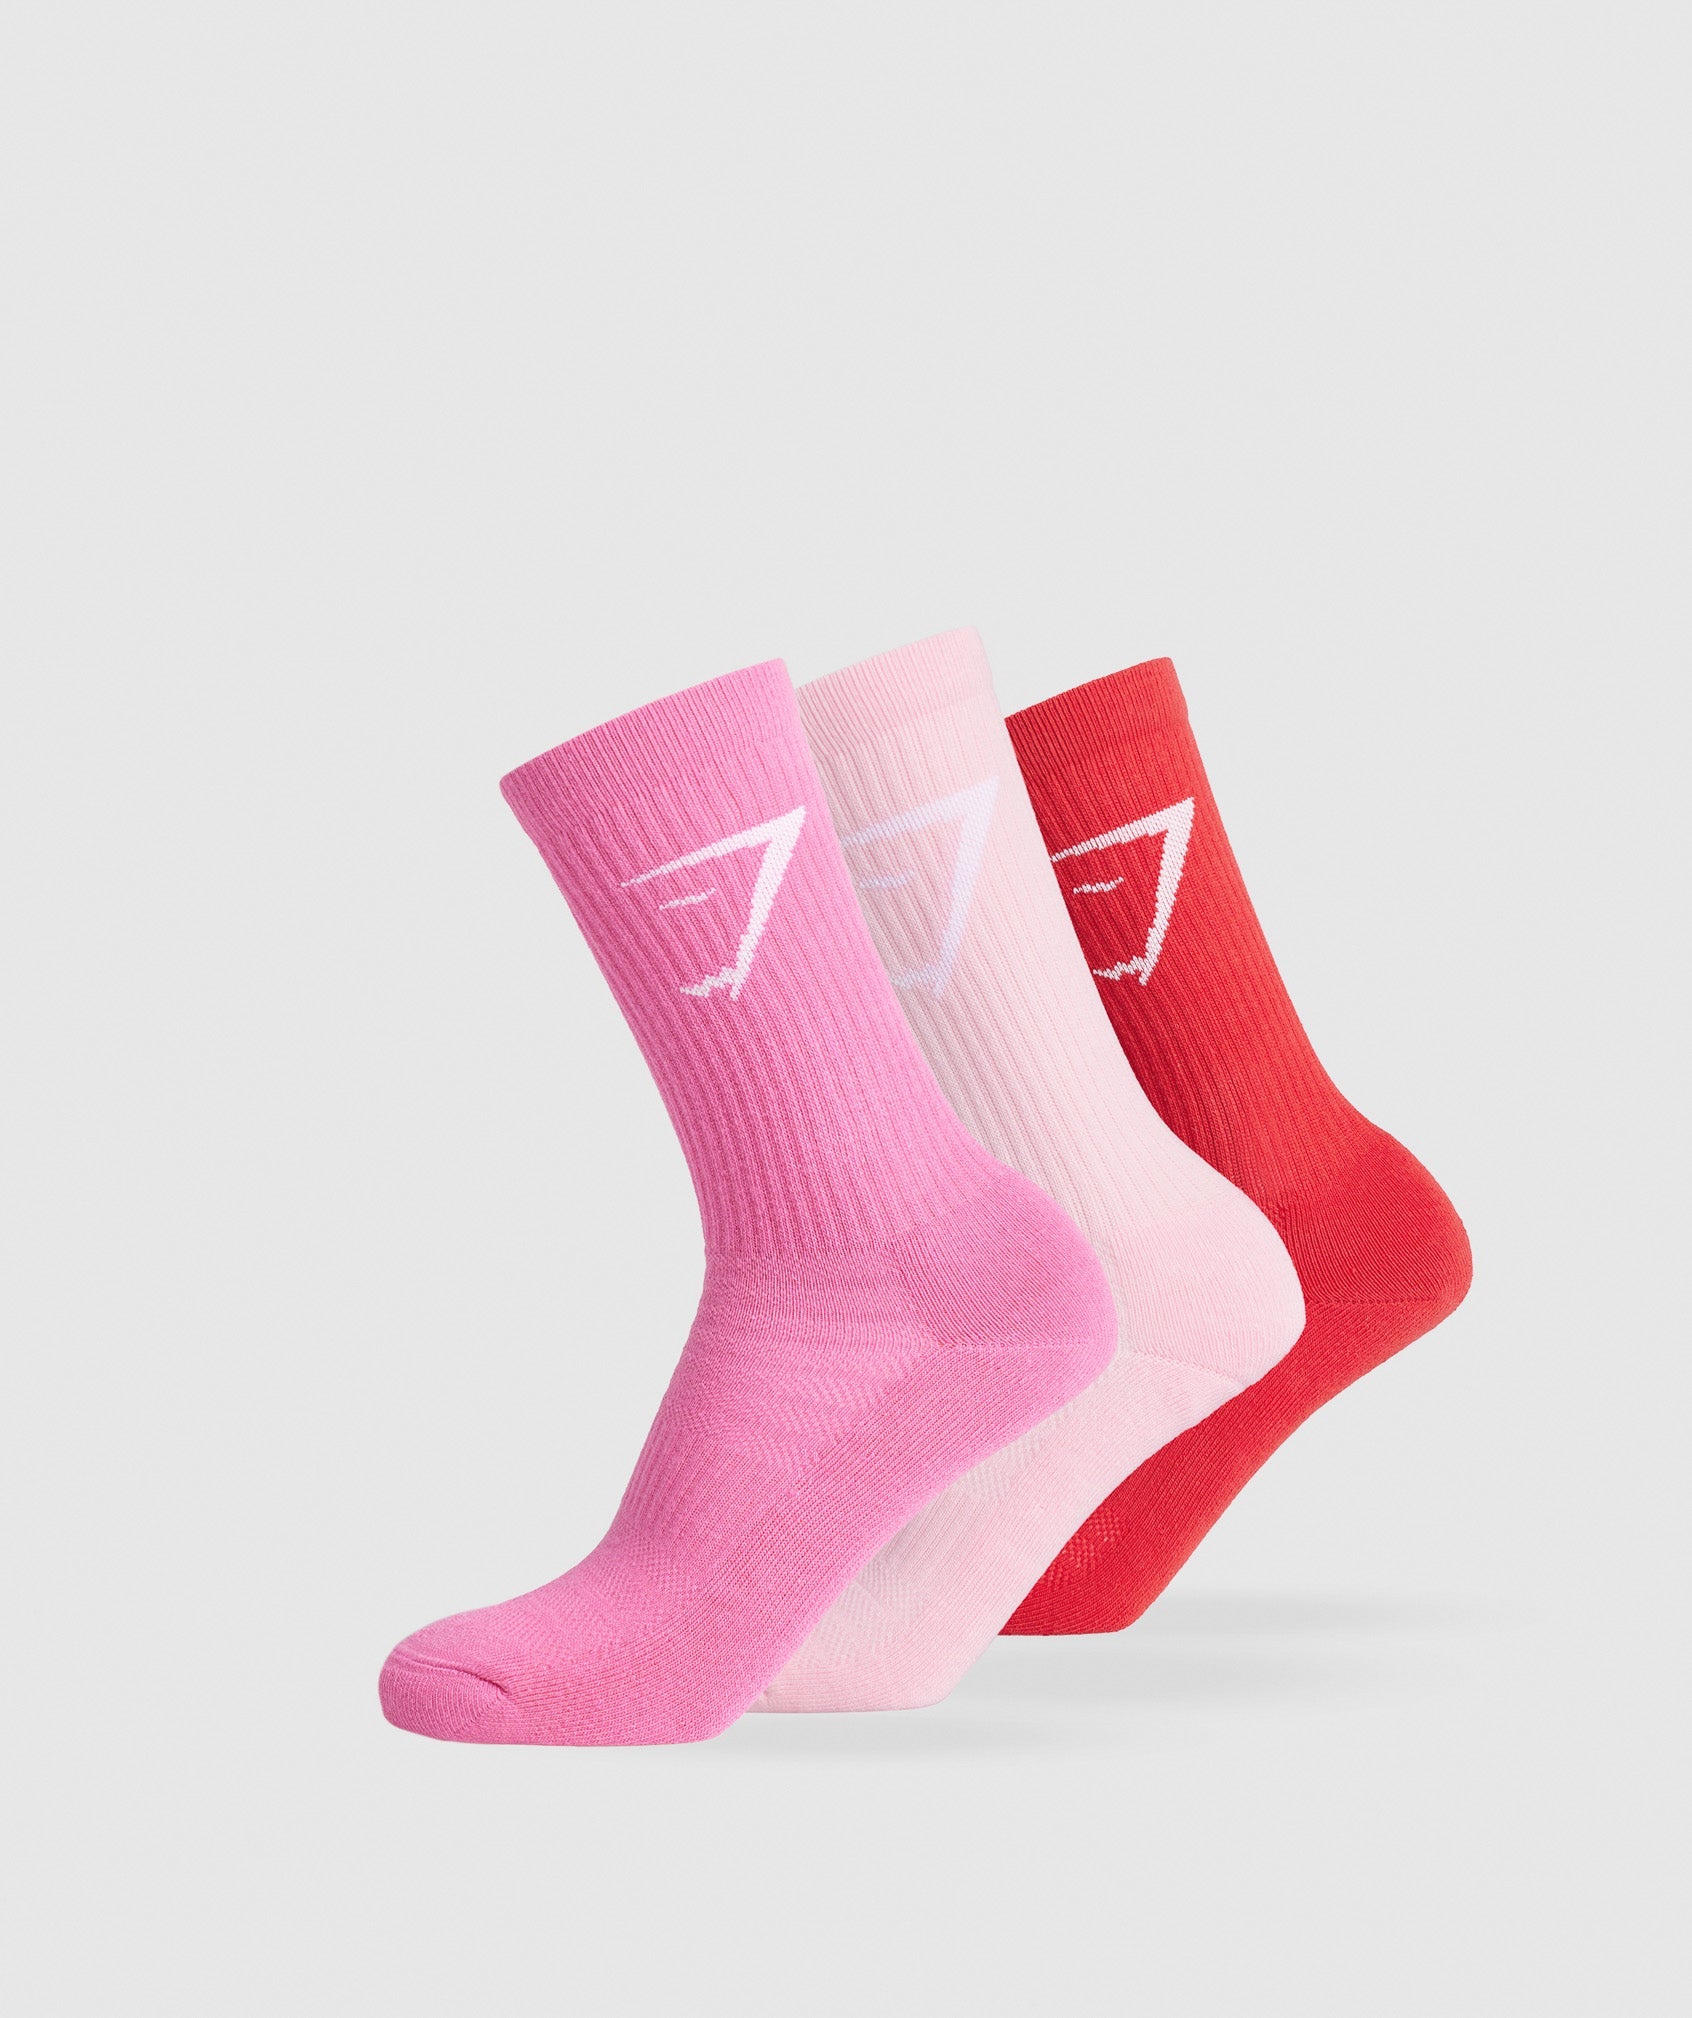 Crew Socks 3pk in Dolly Pink/Fetch Pink/Jamz Red